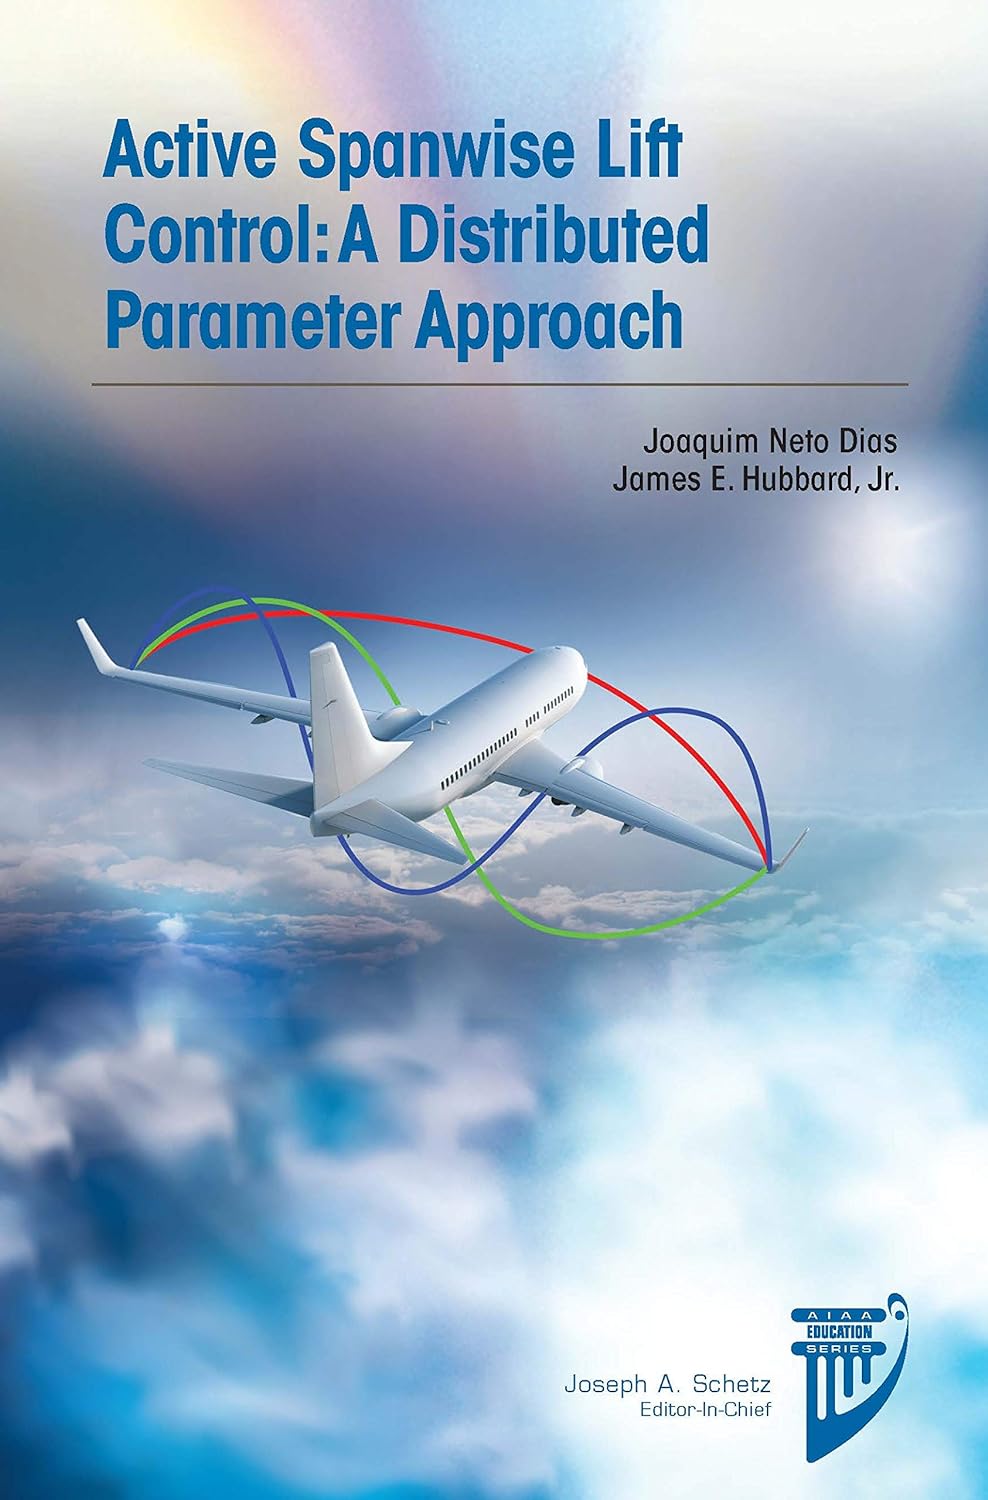 Active Spanwise Lift Control A Distributed Parameter Approach by Joaquim Neto Dias